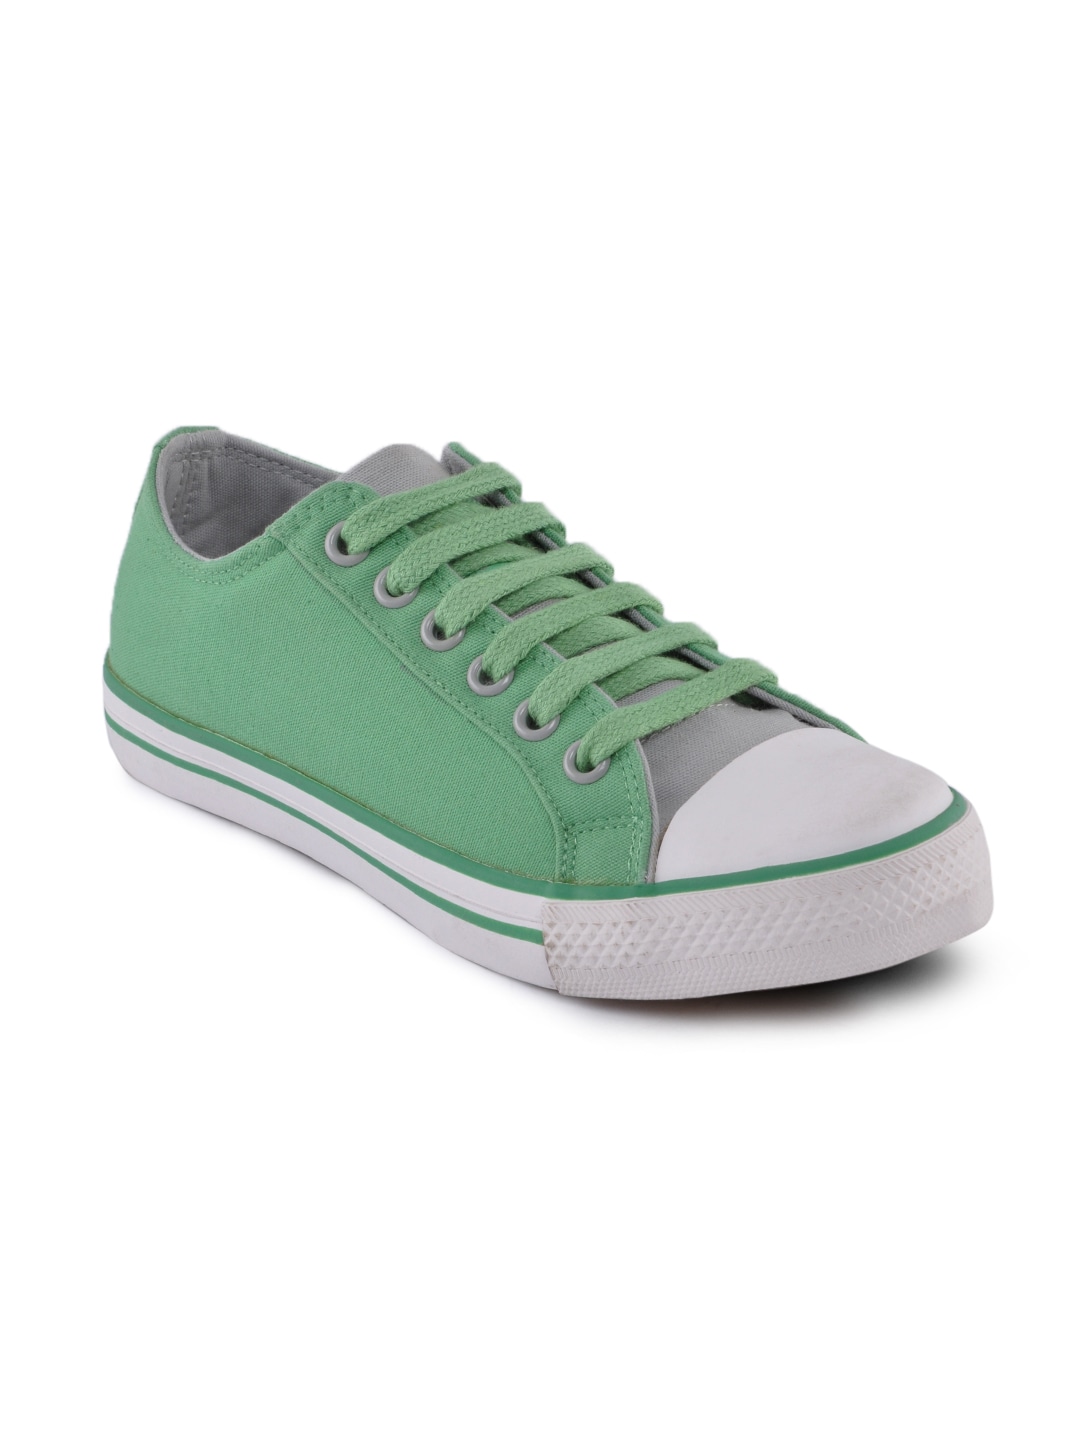 ADIDAS Men Green Color Can Casual Shoes